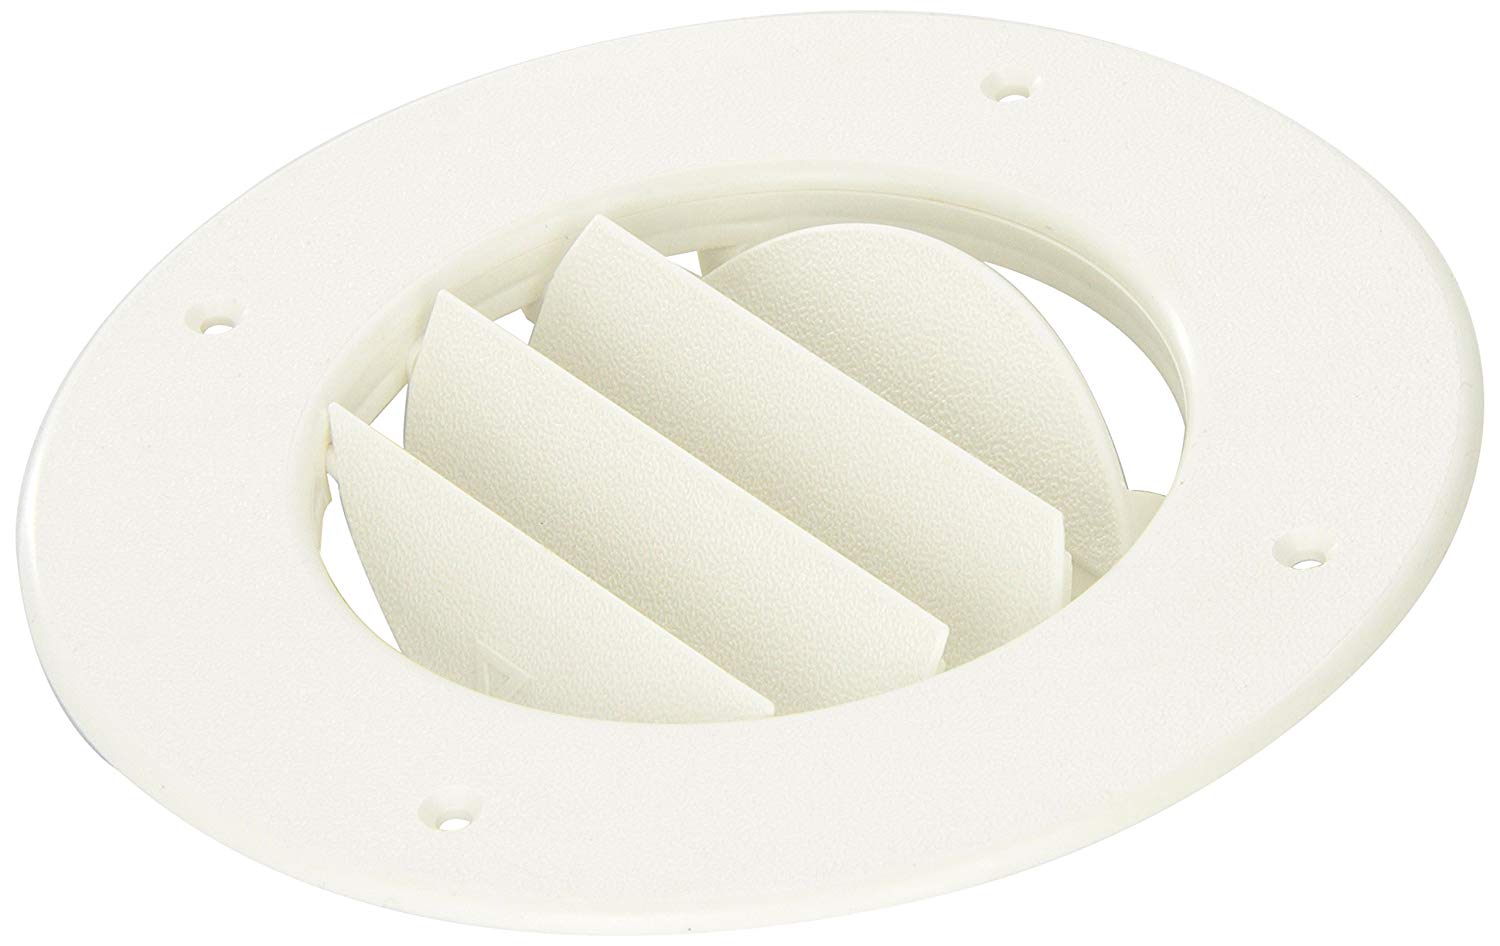 D And W Inc 8840WH Louvered Air Conditioning Ceiling Vent